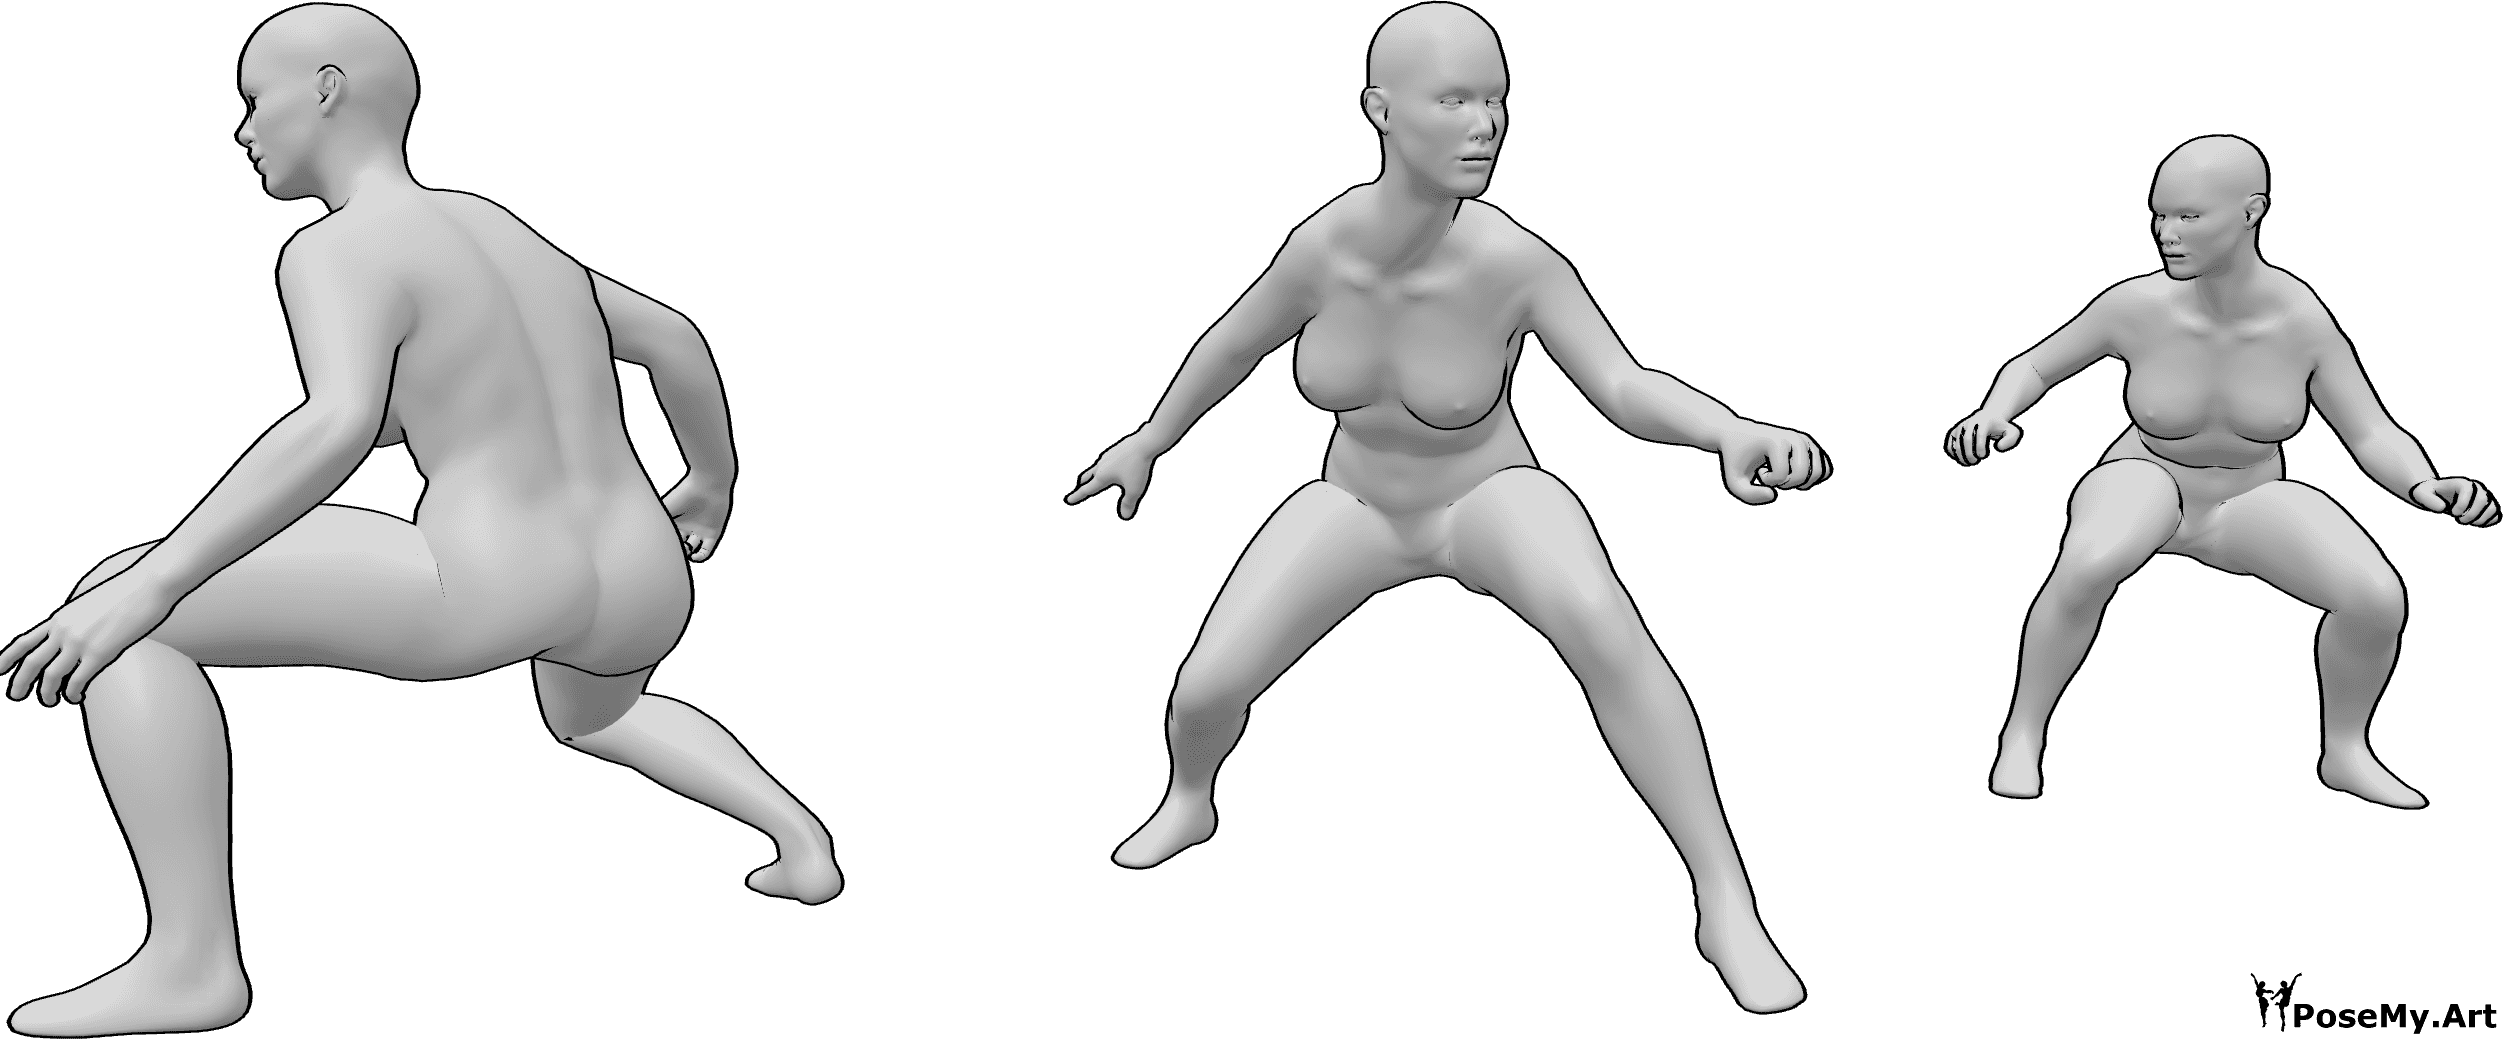 Pose Reference - Three people in a crouching pose - Three realistic women in in a crouching pose